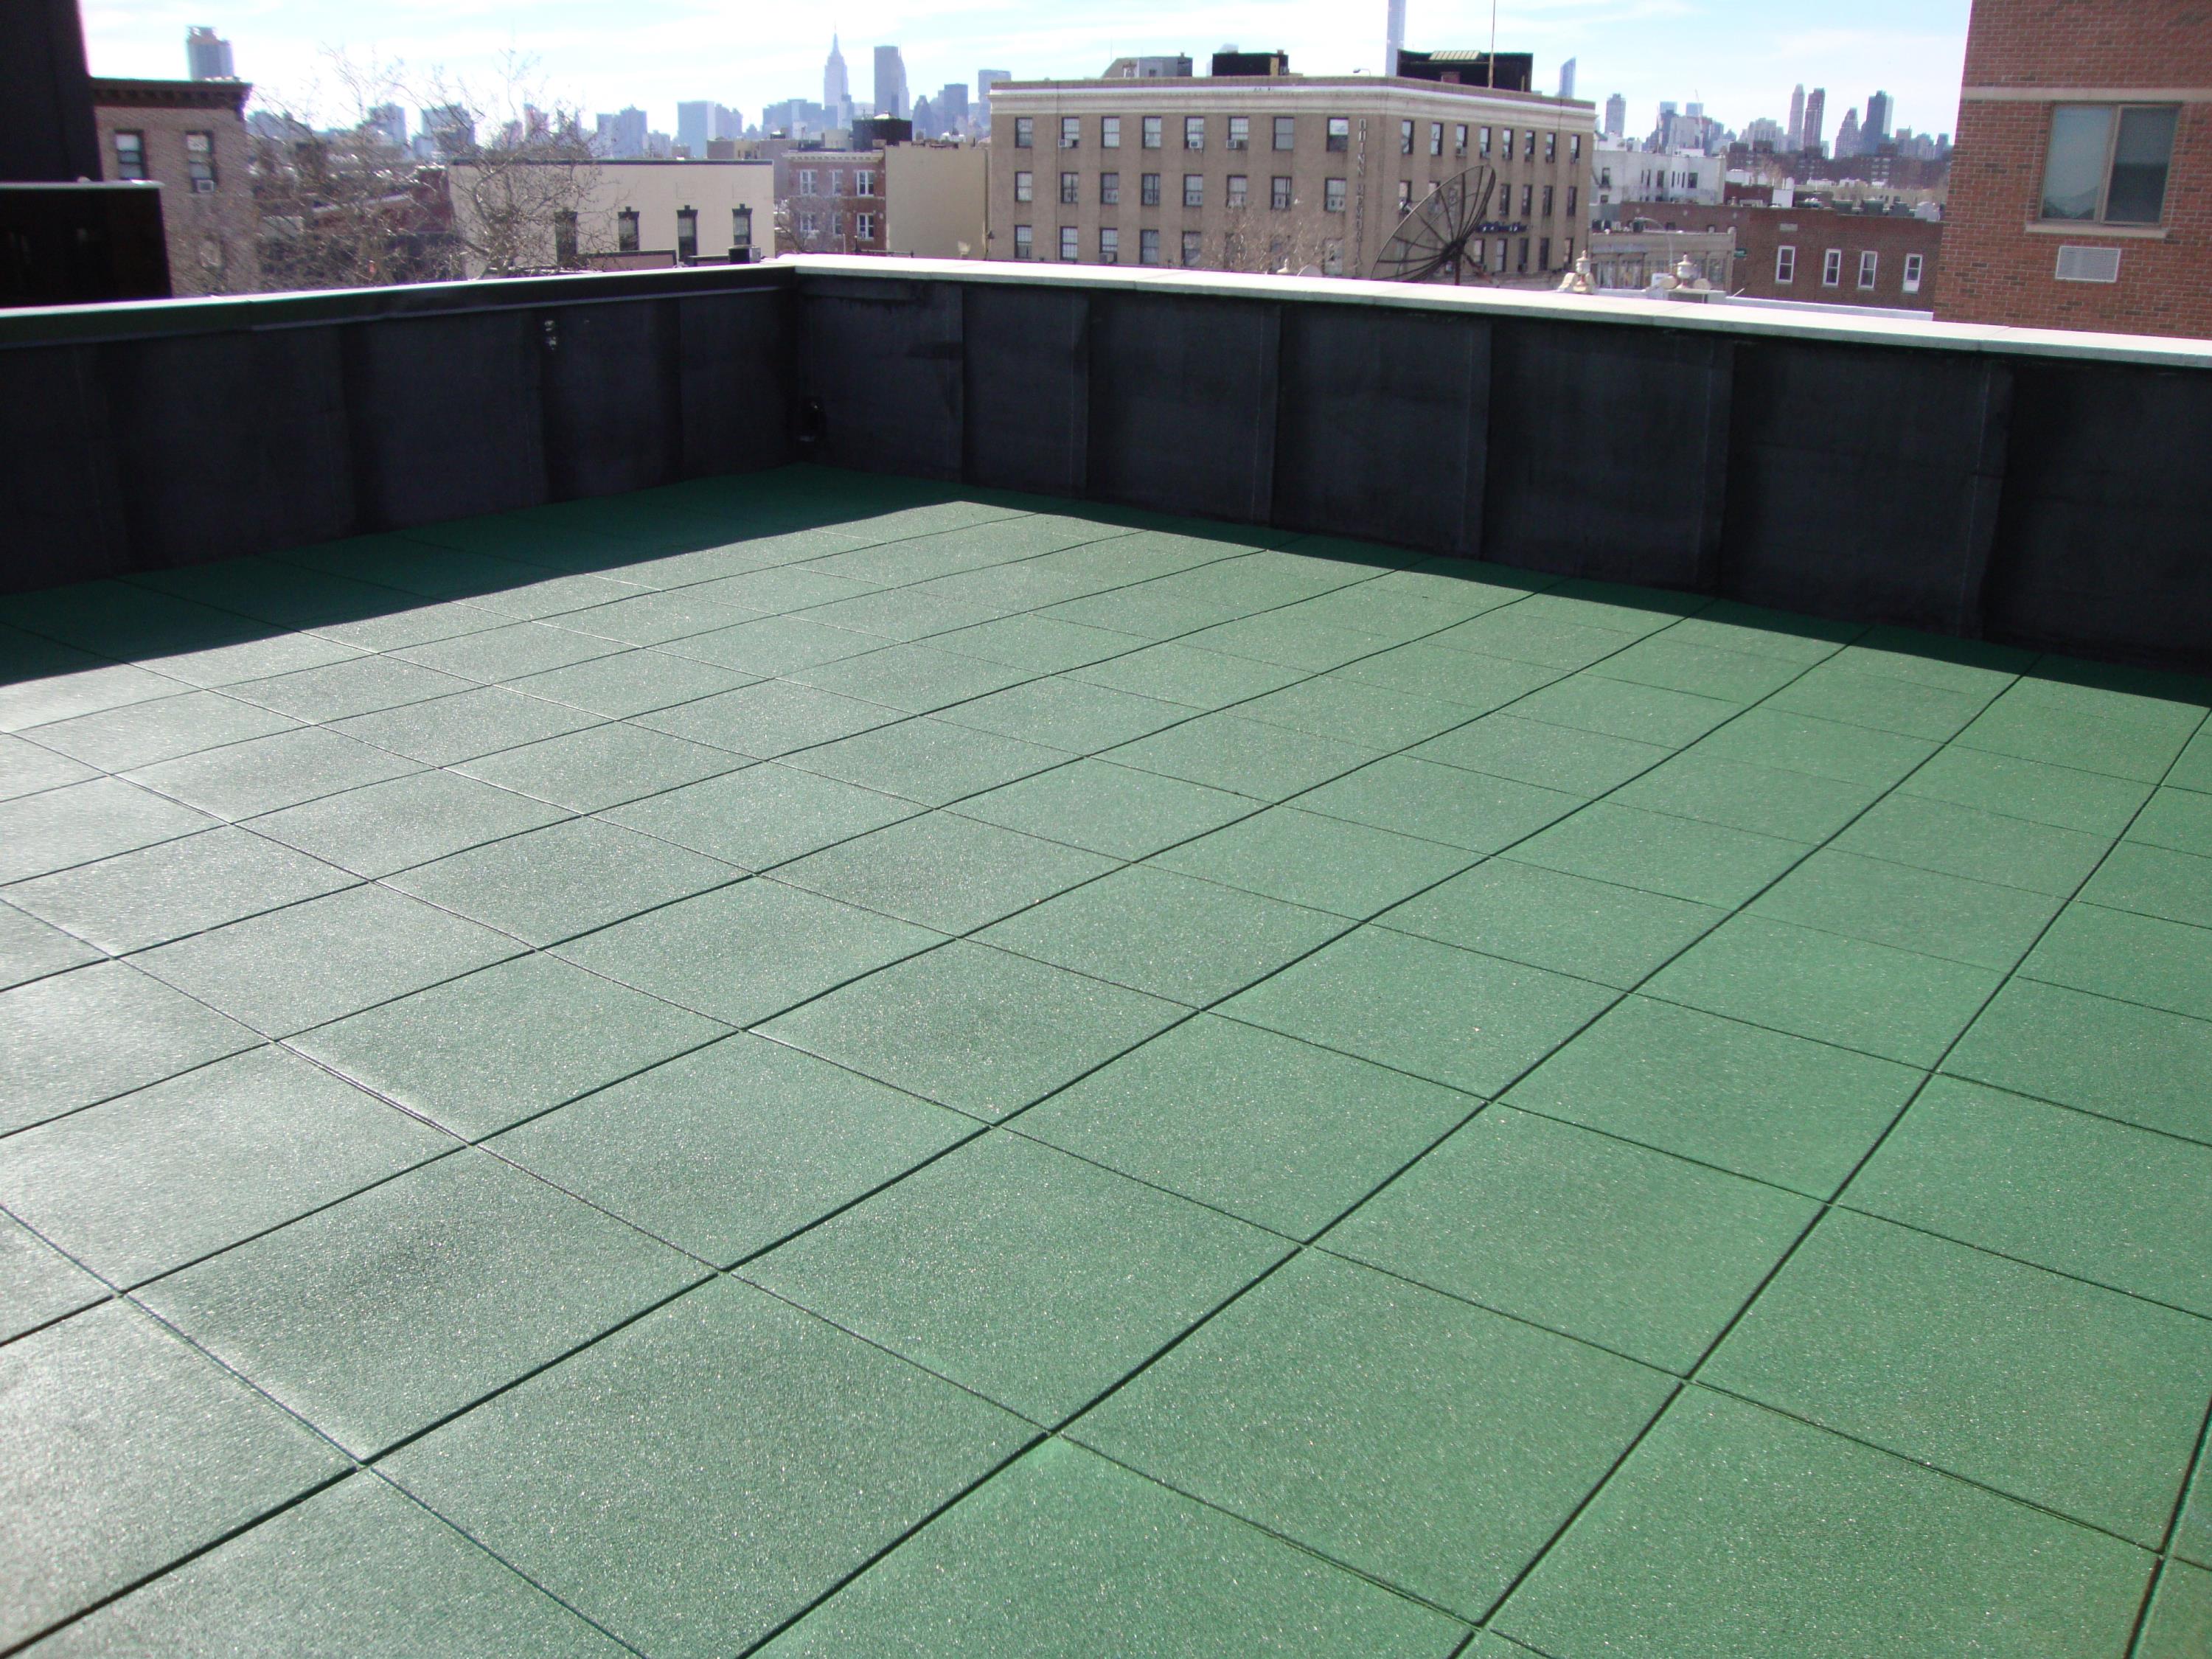 Pave-Land Series using the 2" thick Pigmented Green for this Rooftop